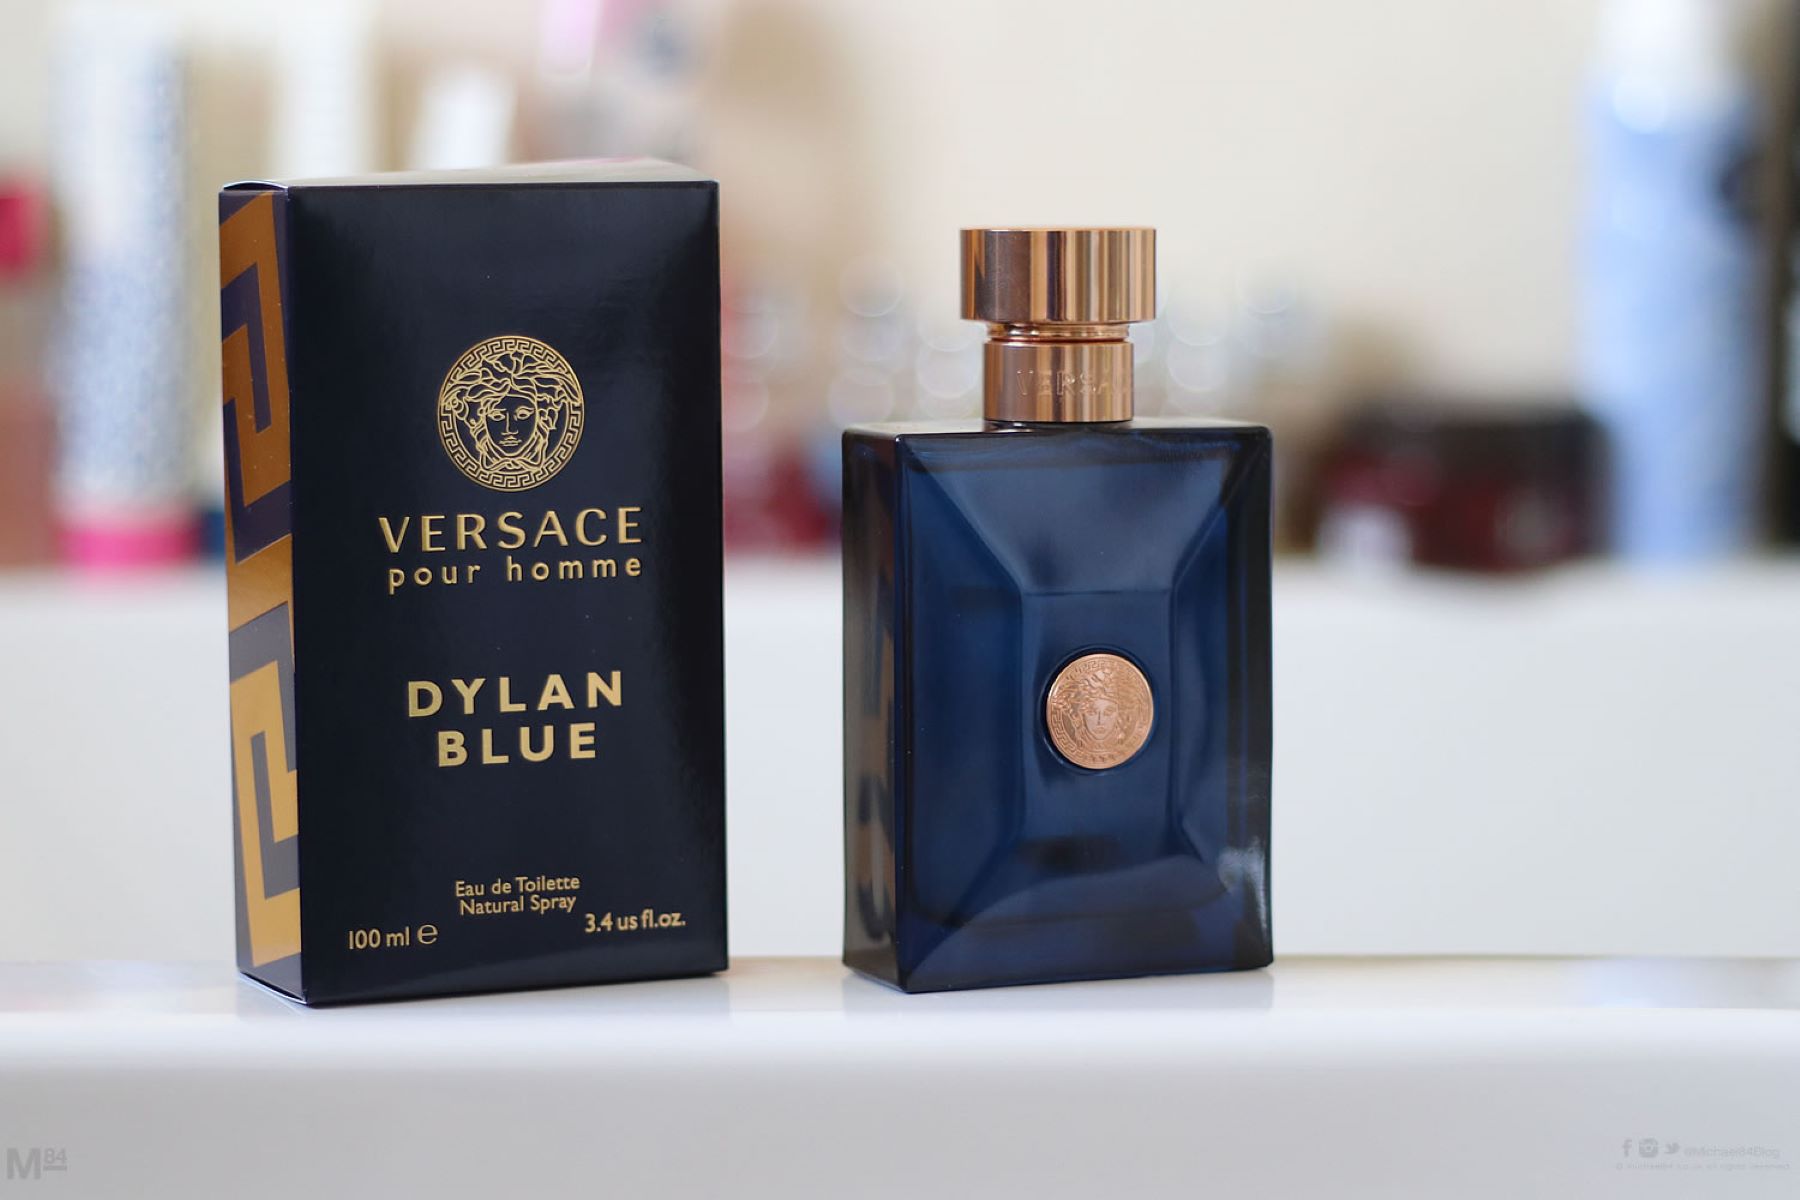 13-year-old Buys Versace Dylan Blue Cologne - Is It A Good Idea?